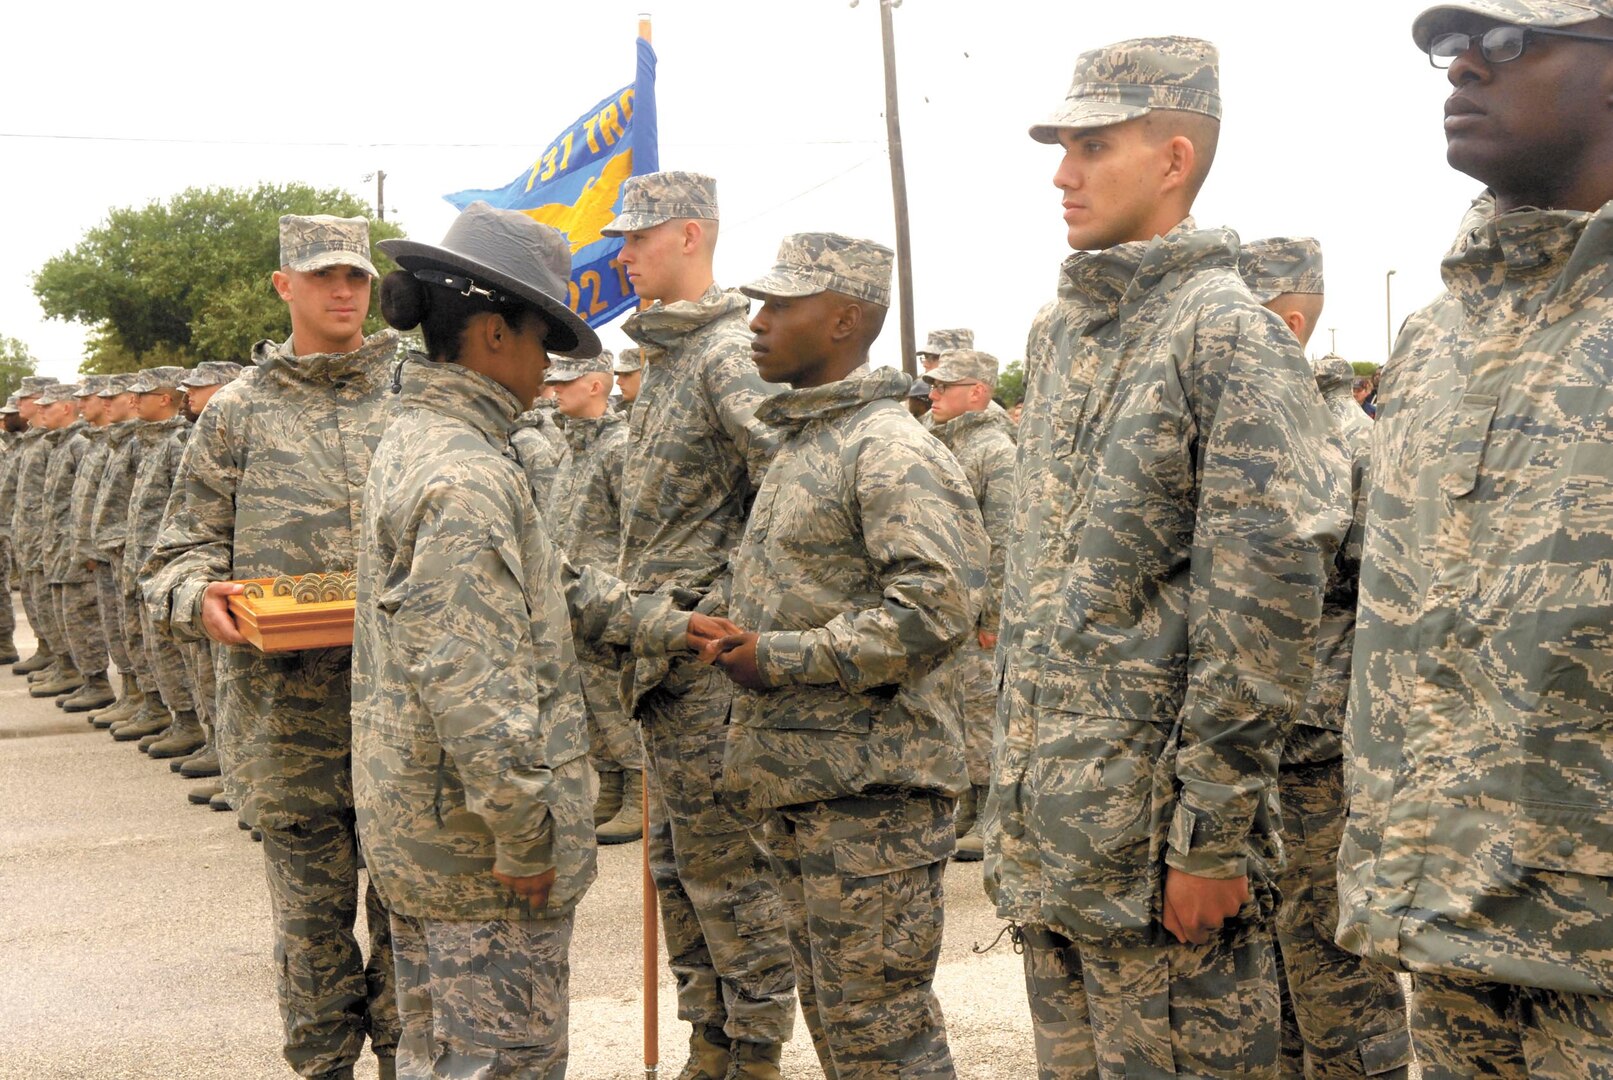 Trainees from 322nd Training Squadron Flight 287 receive coins from their military training instructor team chief, Staff Sgt. Katrevious Swift, during the retreat ceremony April 18 at Joint Base San Antonio-Lackland.